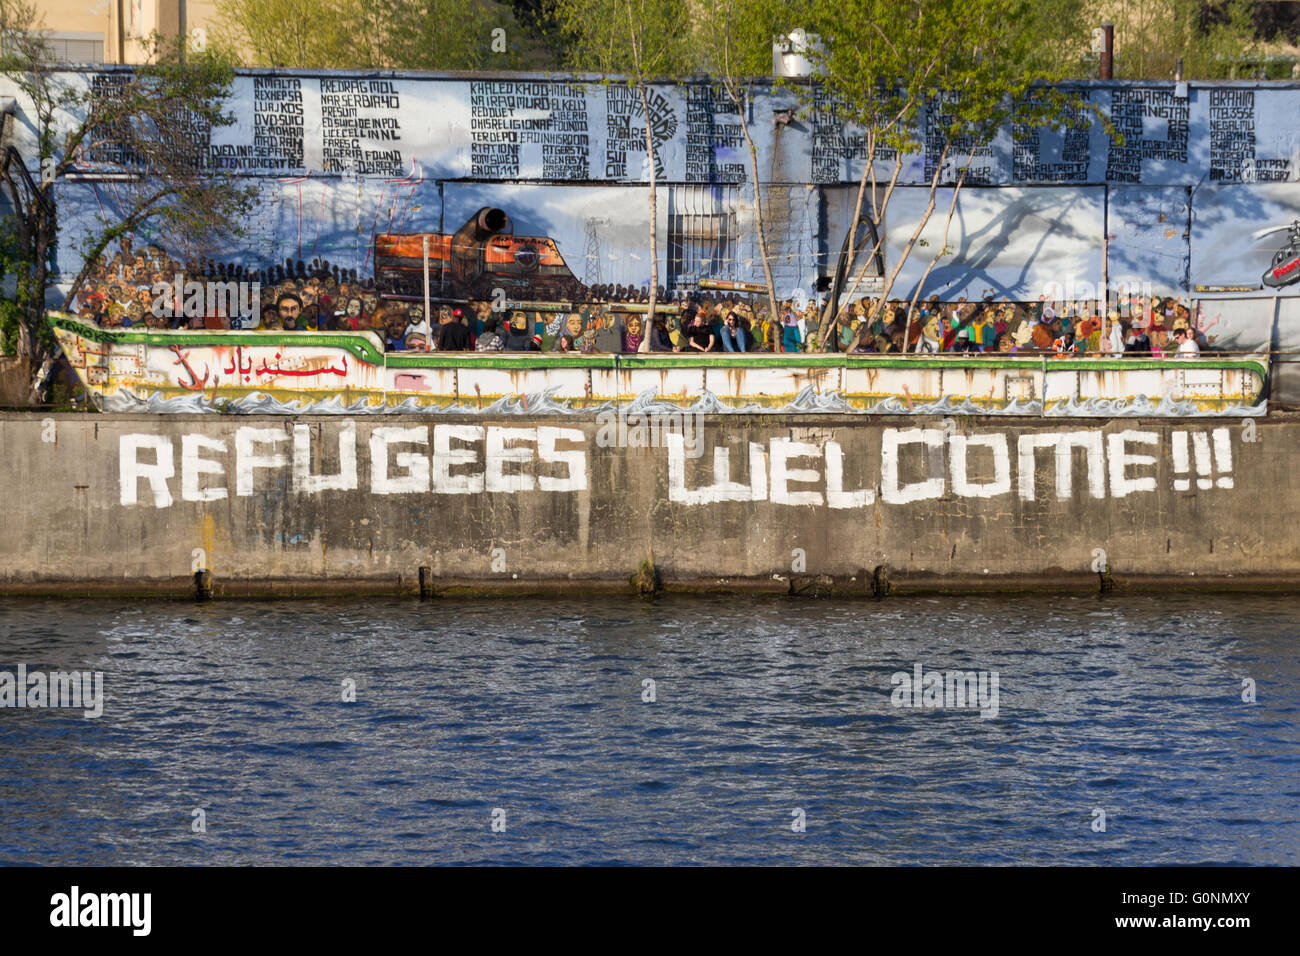 Berlin, German - april 30, 2016: Refugees welcome graffiti and refugee boat painting in Berlin, germany. Stock Photo